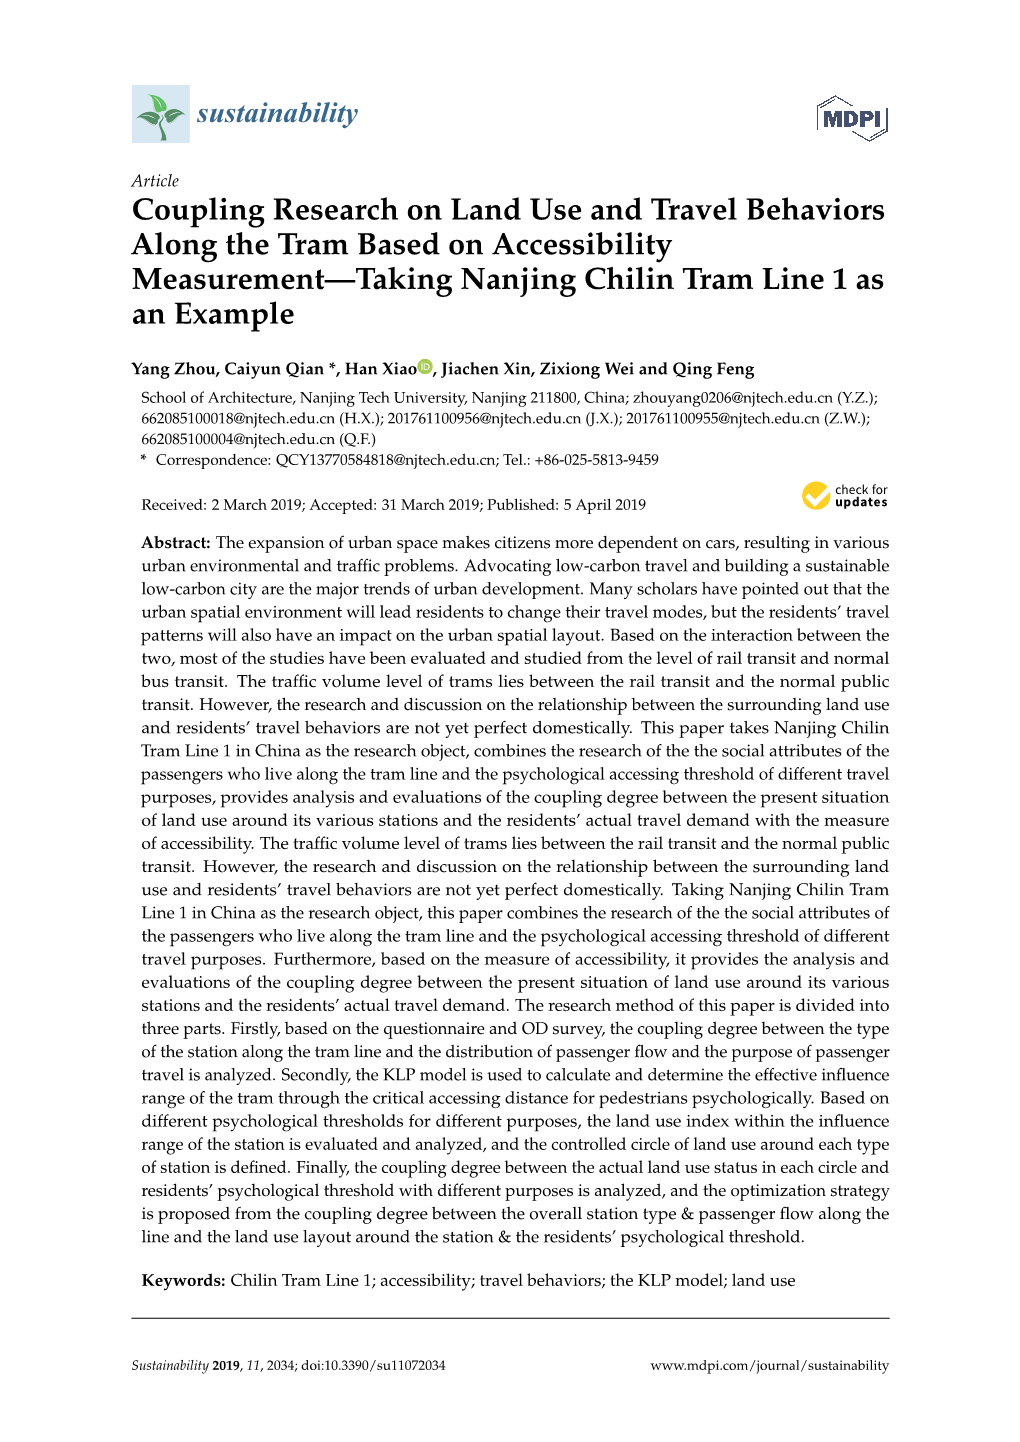 Coupling Research on Land Use and Travel Behaviors Along the Tram Based on Accessibility Measurement—Taking Nanjing Chilin Tram Line 1 As an Example